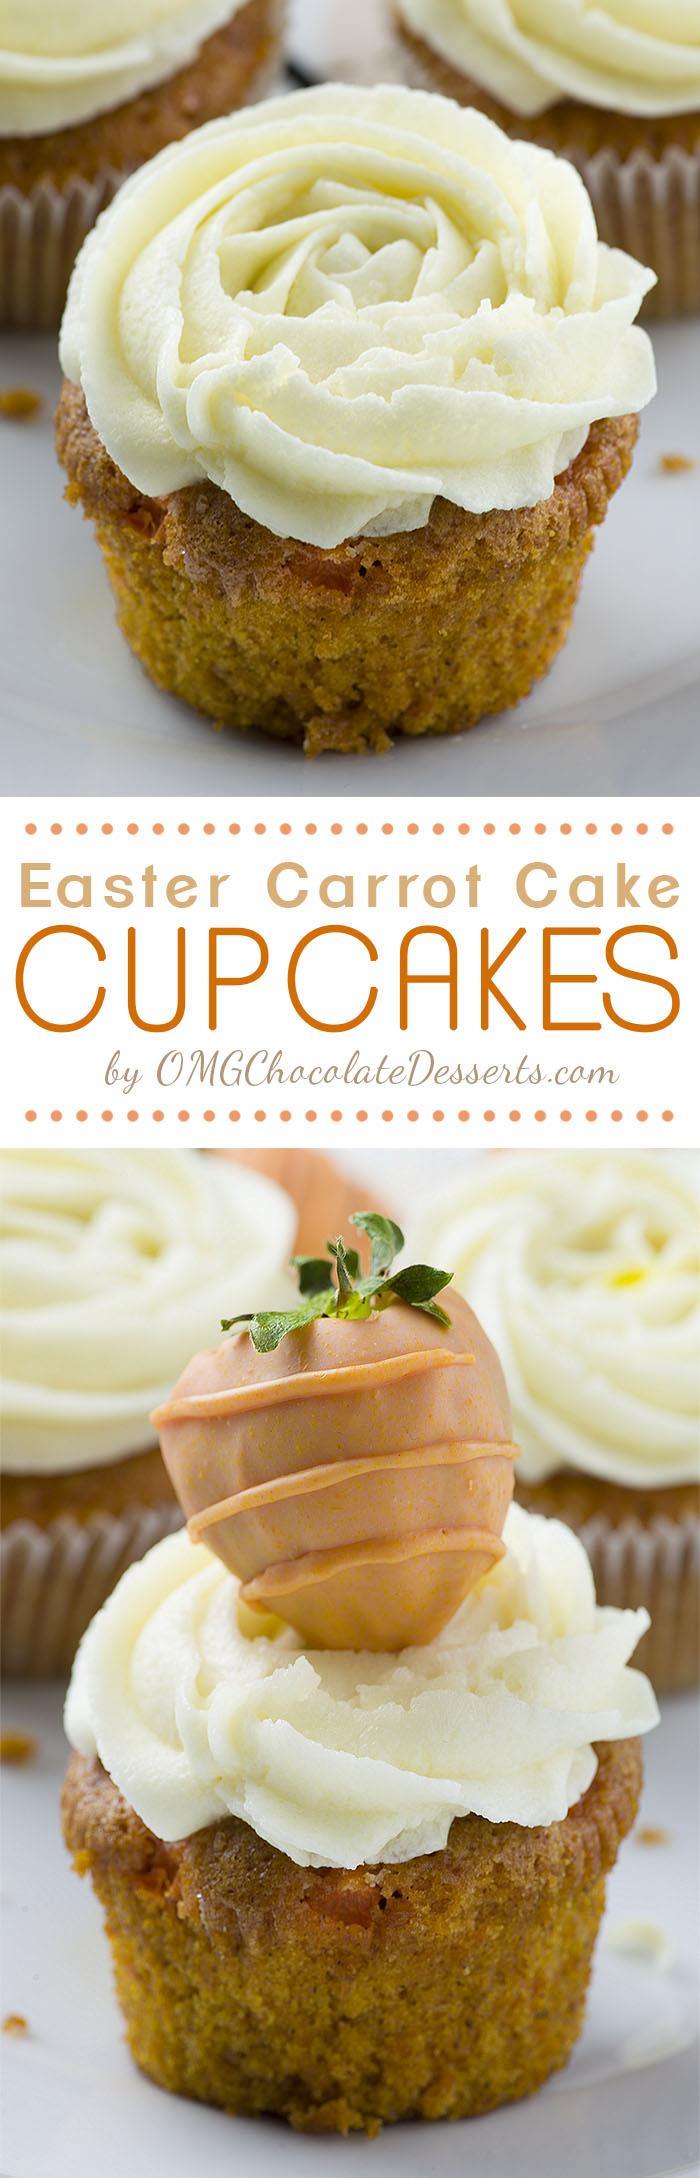 Carrot Cake Cupcakes - absolutely perfect Easter dessert. Easy to make and super moist carrot cupcakes garnished with cute Carrot Chocolate